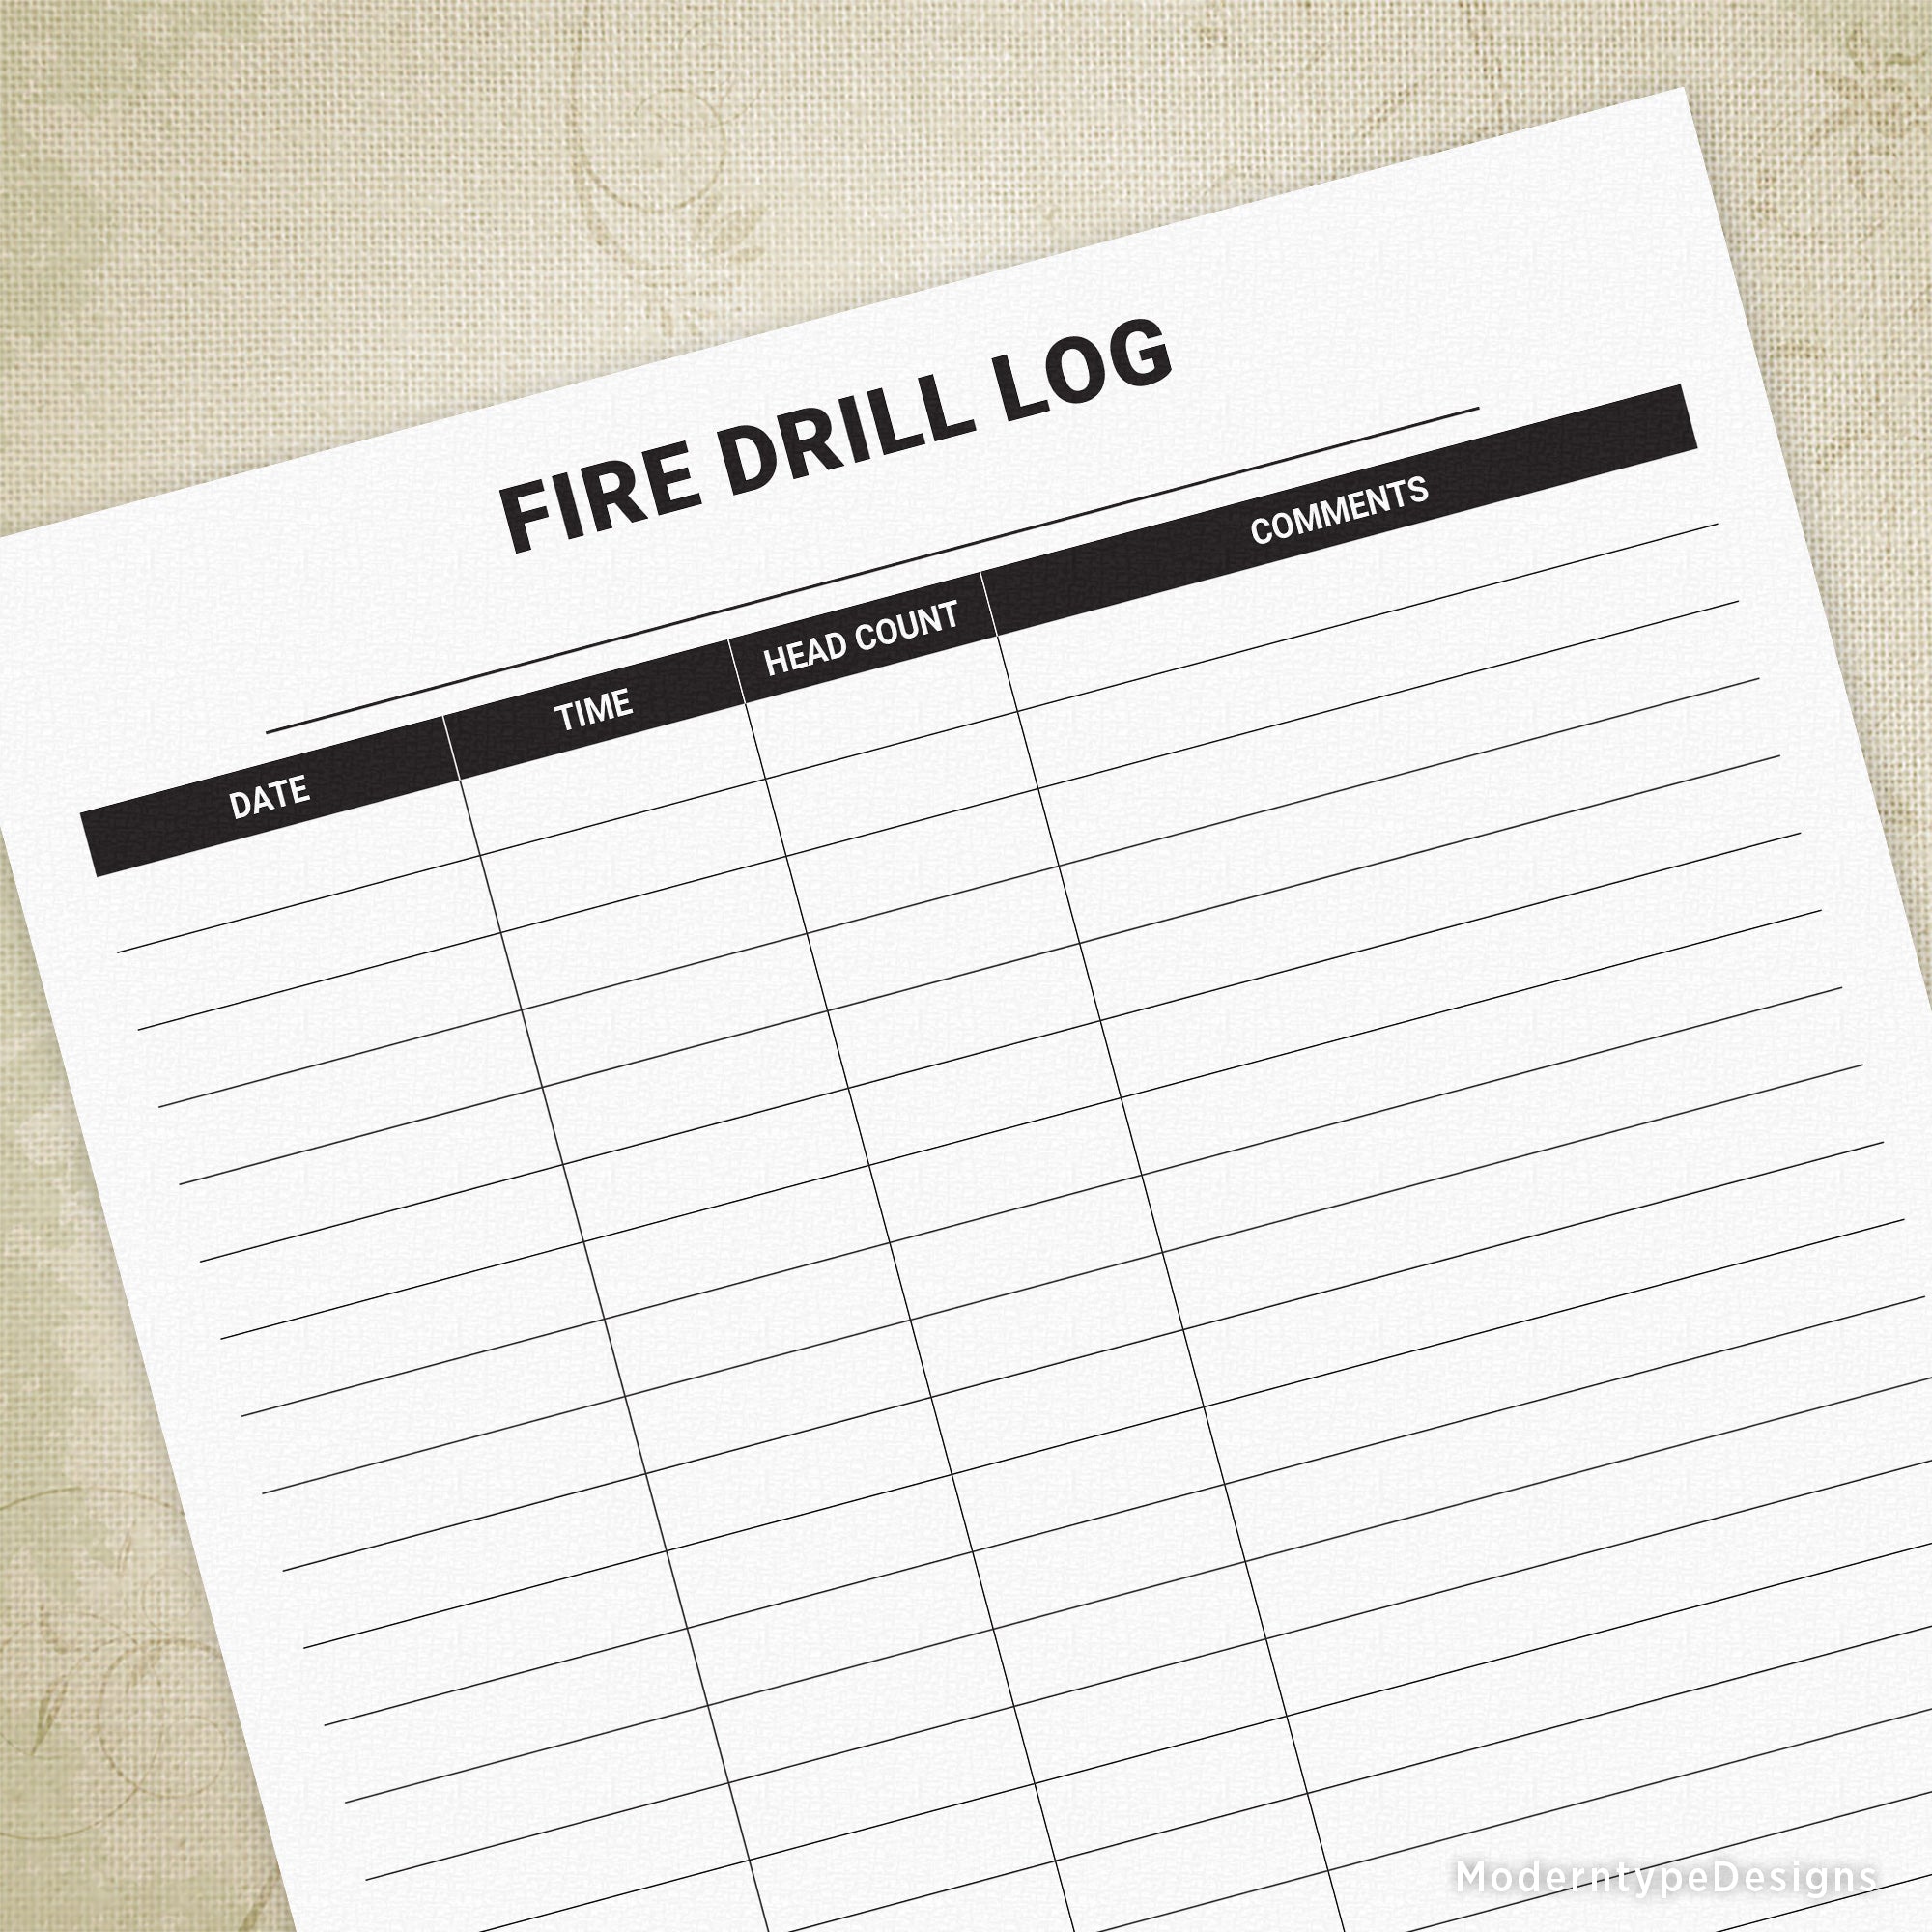 Fire Drill Log Printable for any Building